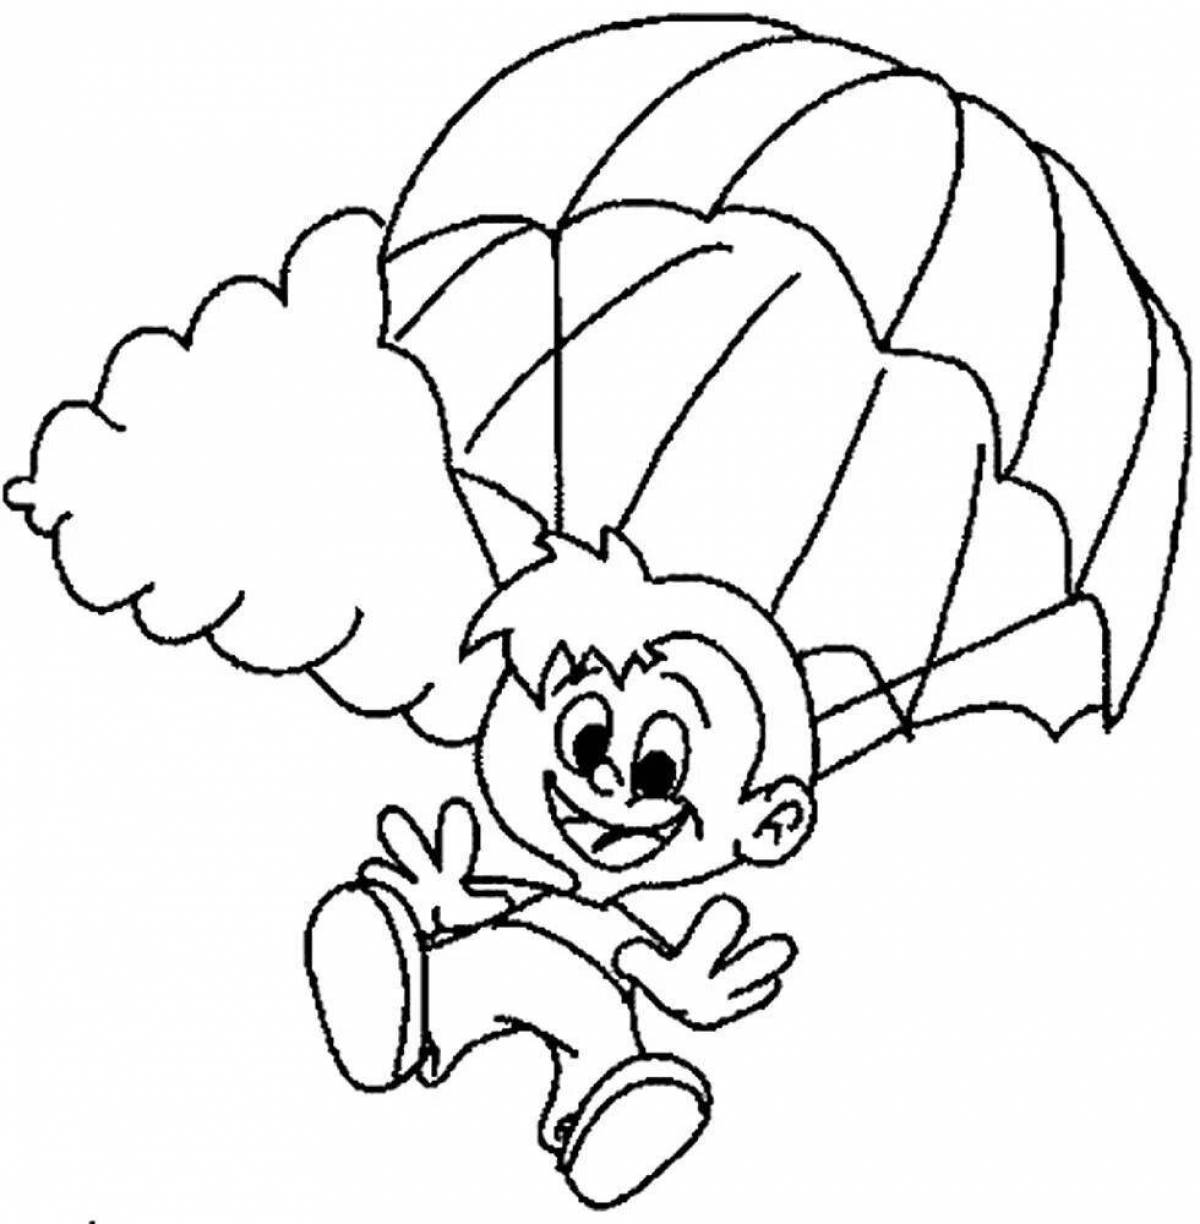 Funny paratrooper coloring for kids